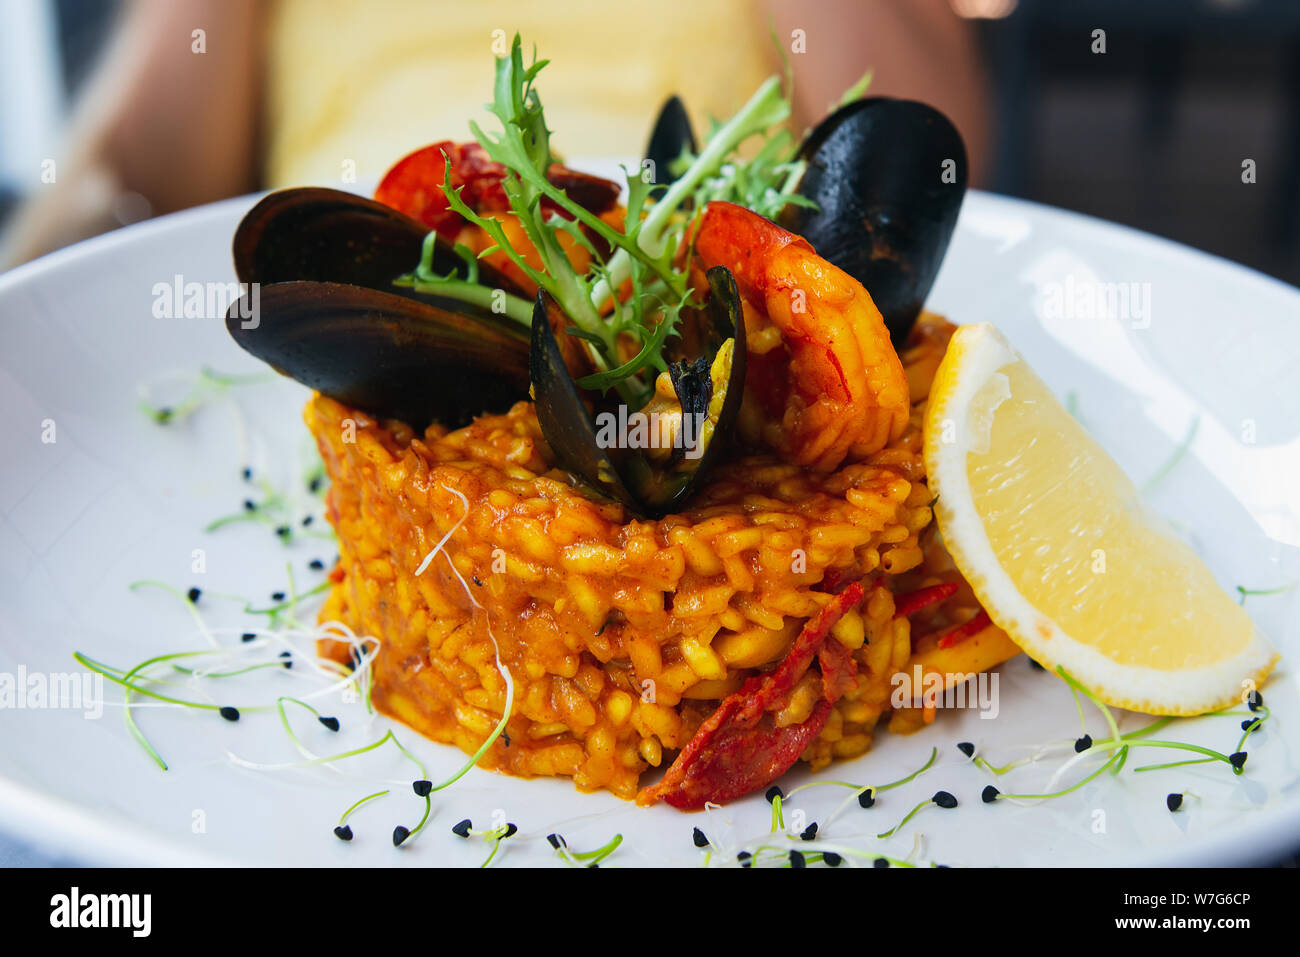 Spanish paella with mussels and shrimps decorated with lemon and arugula. Served on a white plate with lemon. Closeup fo a beautiful rice dish. Stock Photo